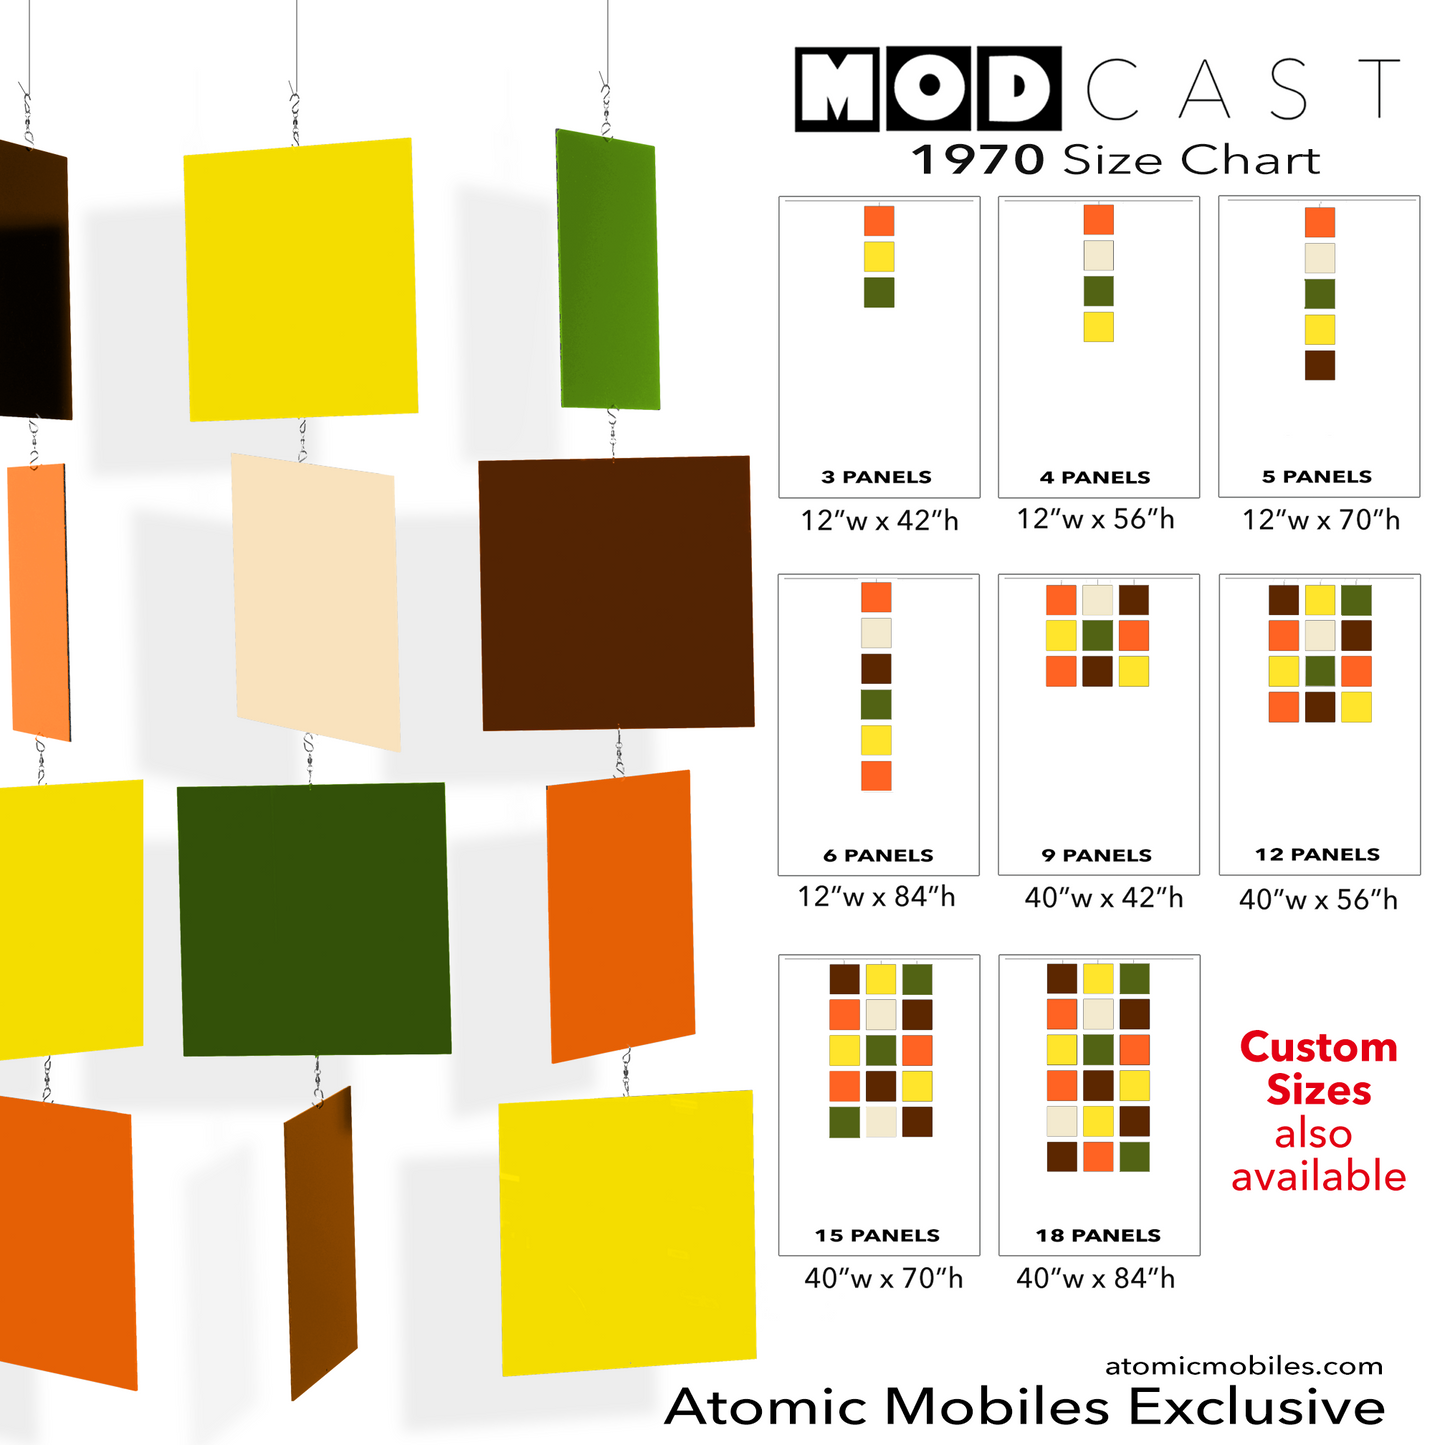 1970 MODcast kinetic hanging art mobiles in Orange, Olive Green, Brown, Cream, and Yellow acrylic plexiglass panels - mid century modern style home decor by AtomicMobiles.com